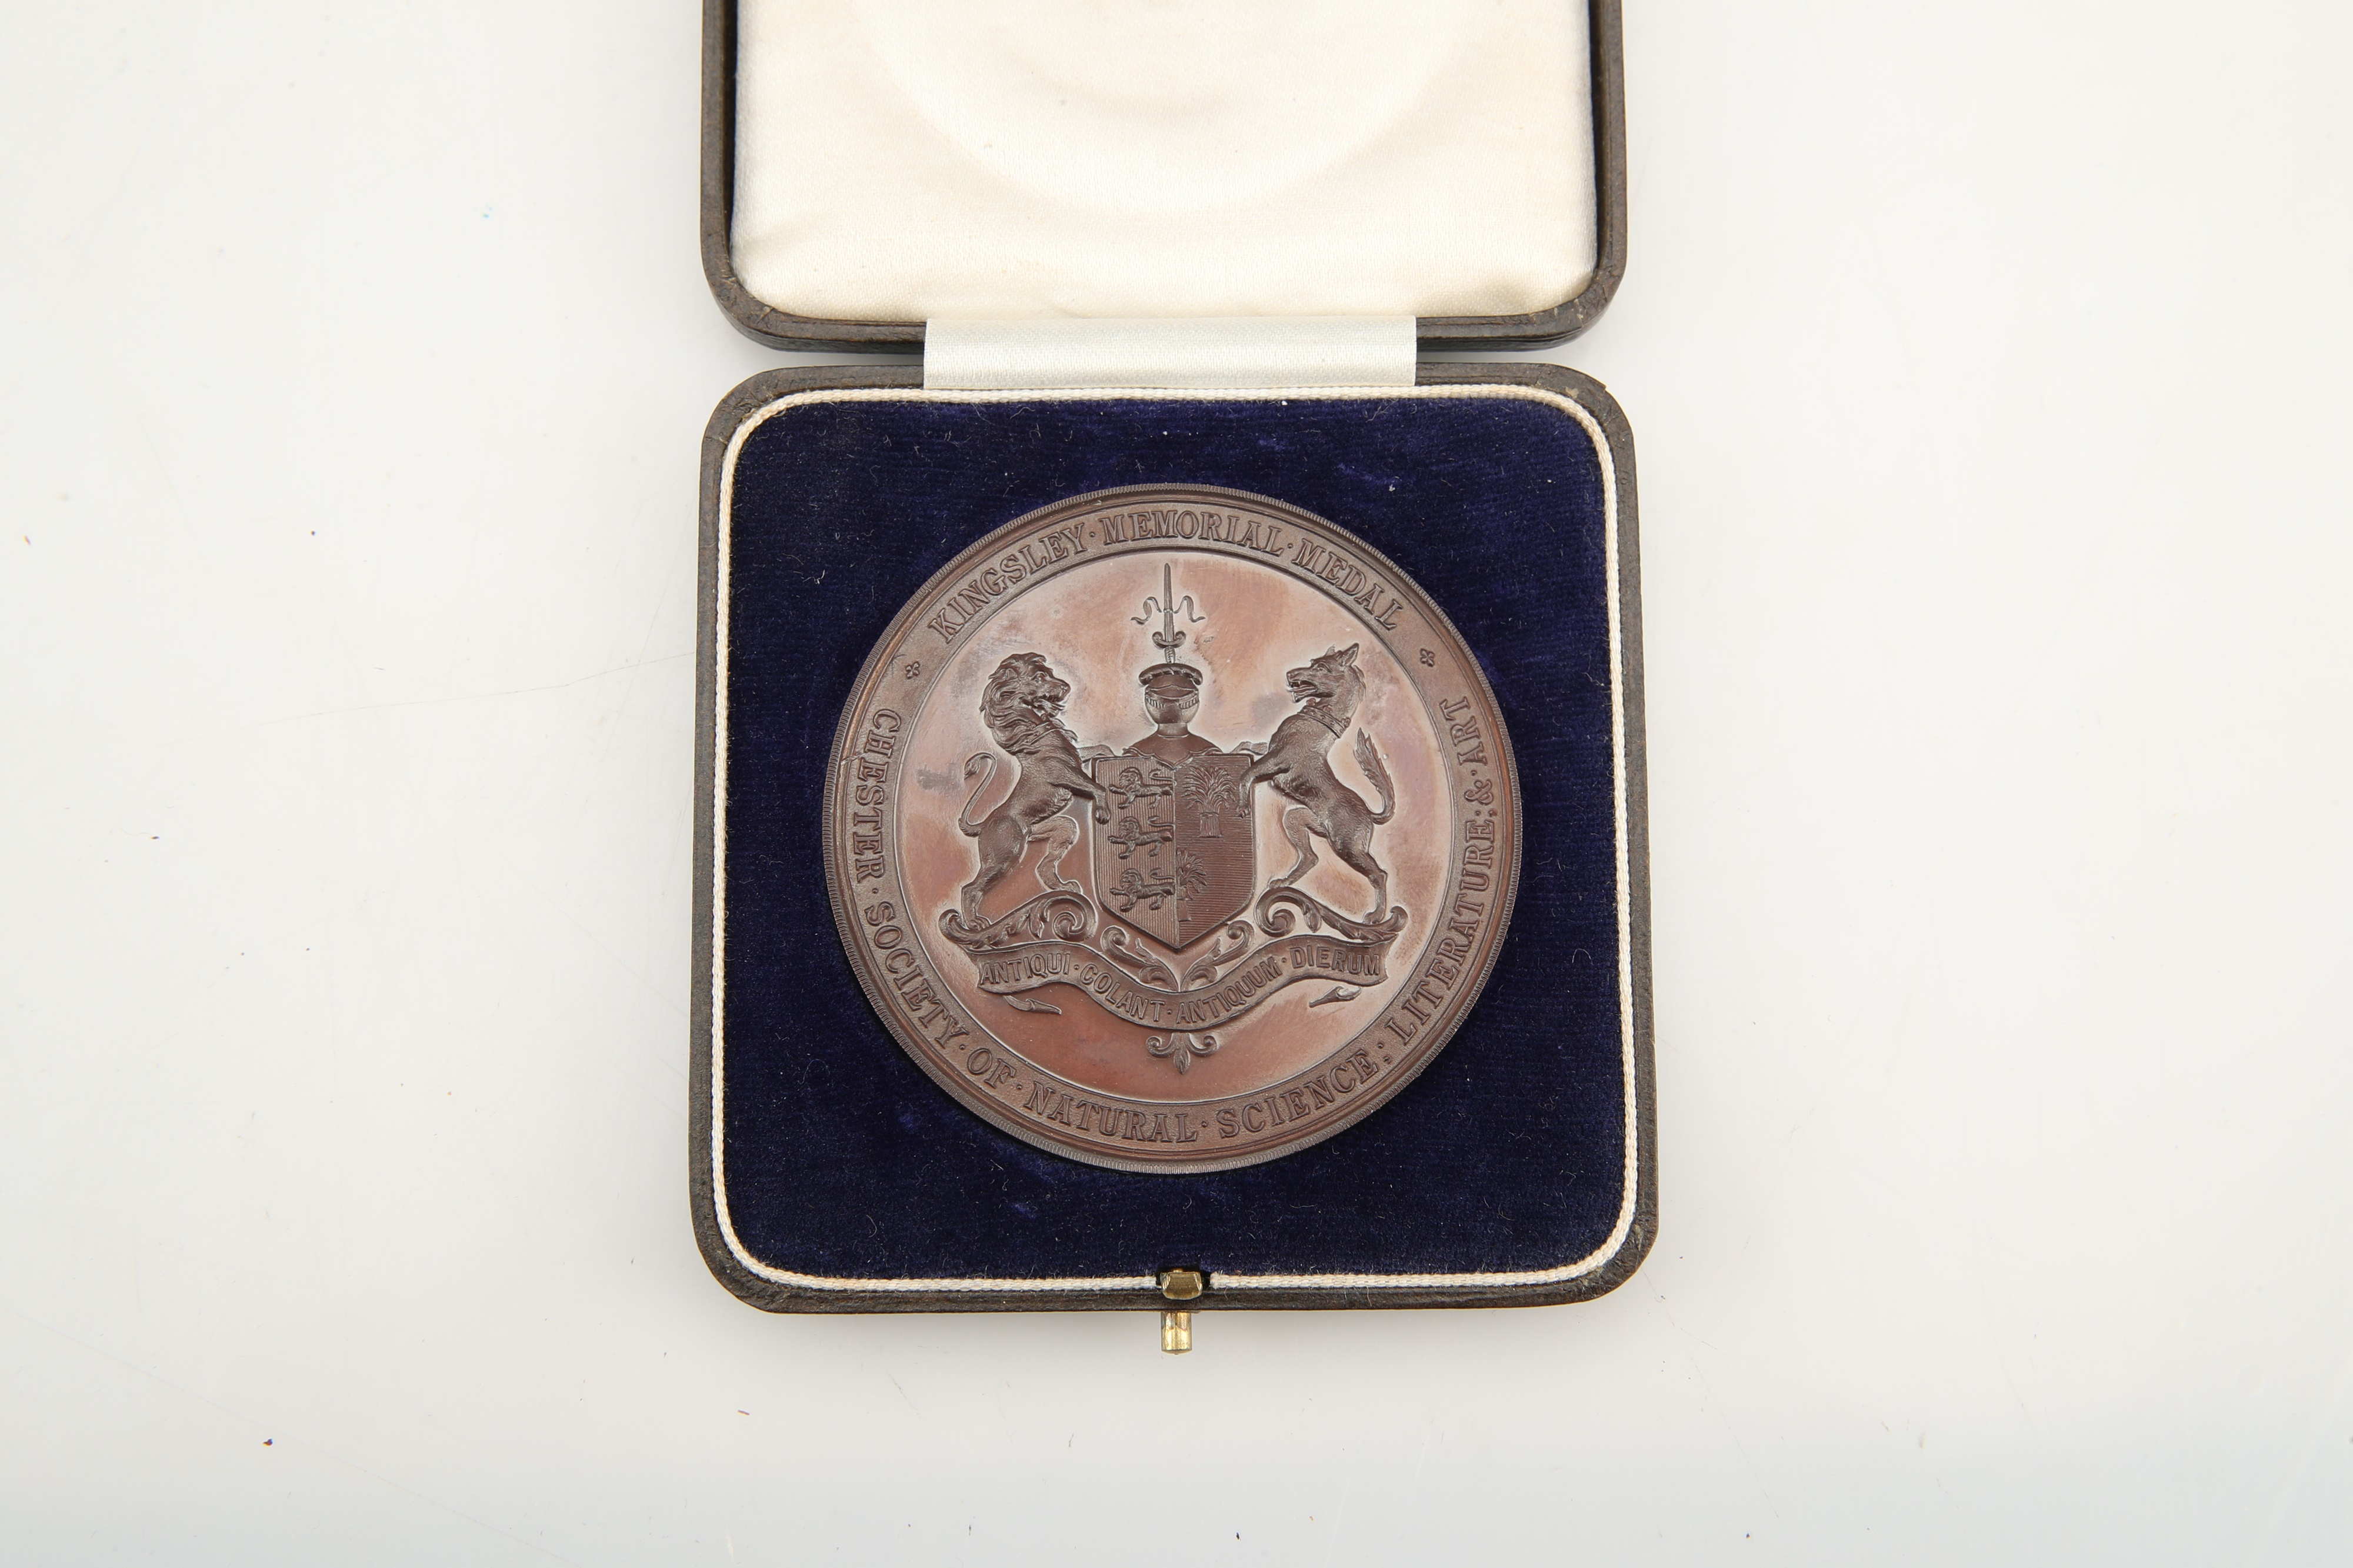 Chester Society of Natural Science, Literature & Art Kingsley Memorial Medals - Image 2 of 5